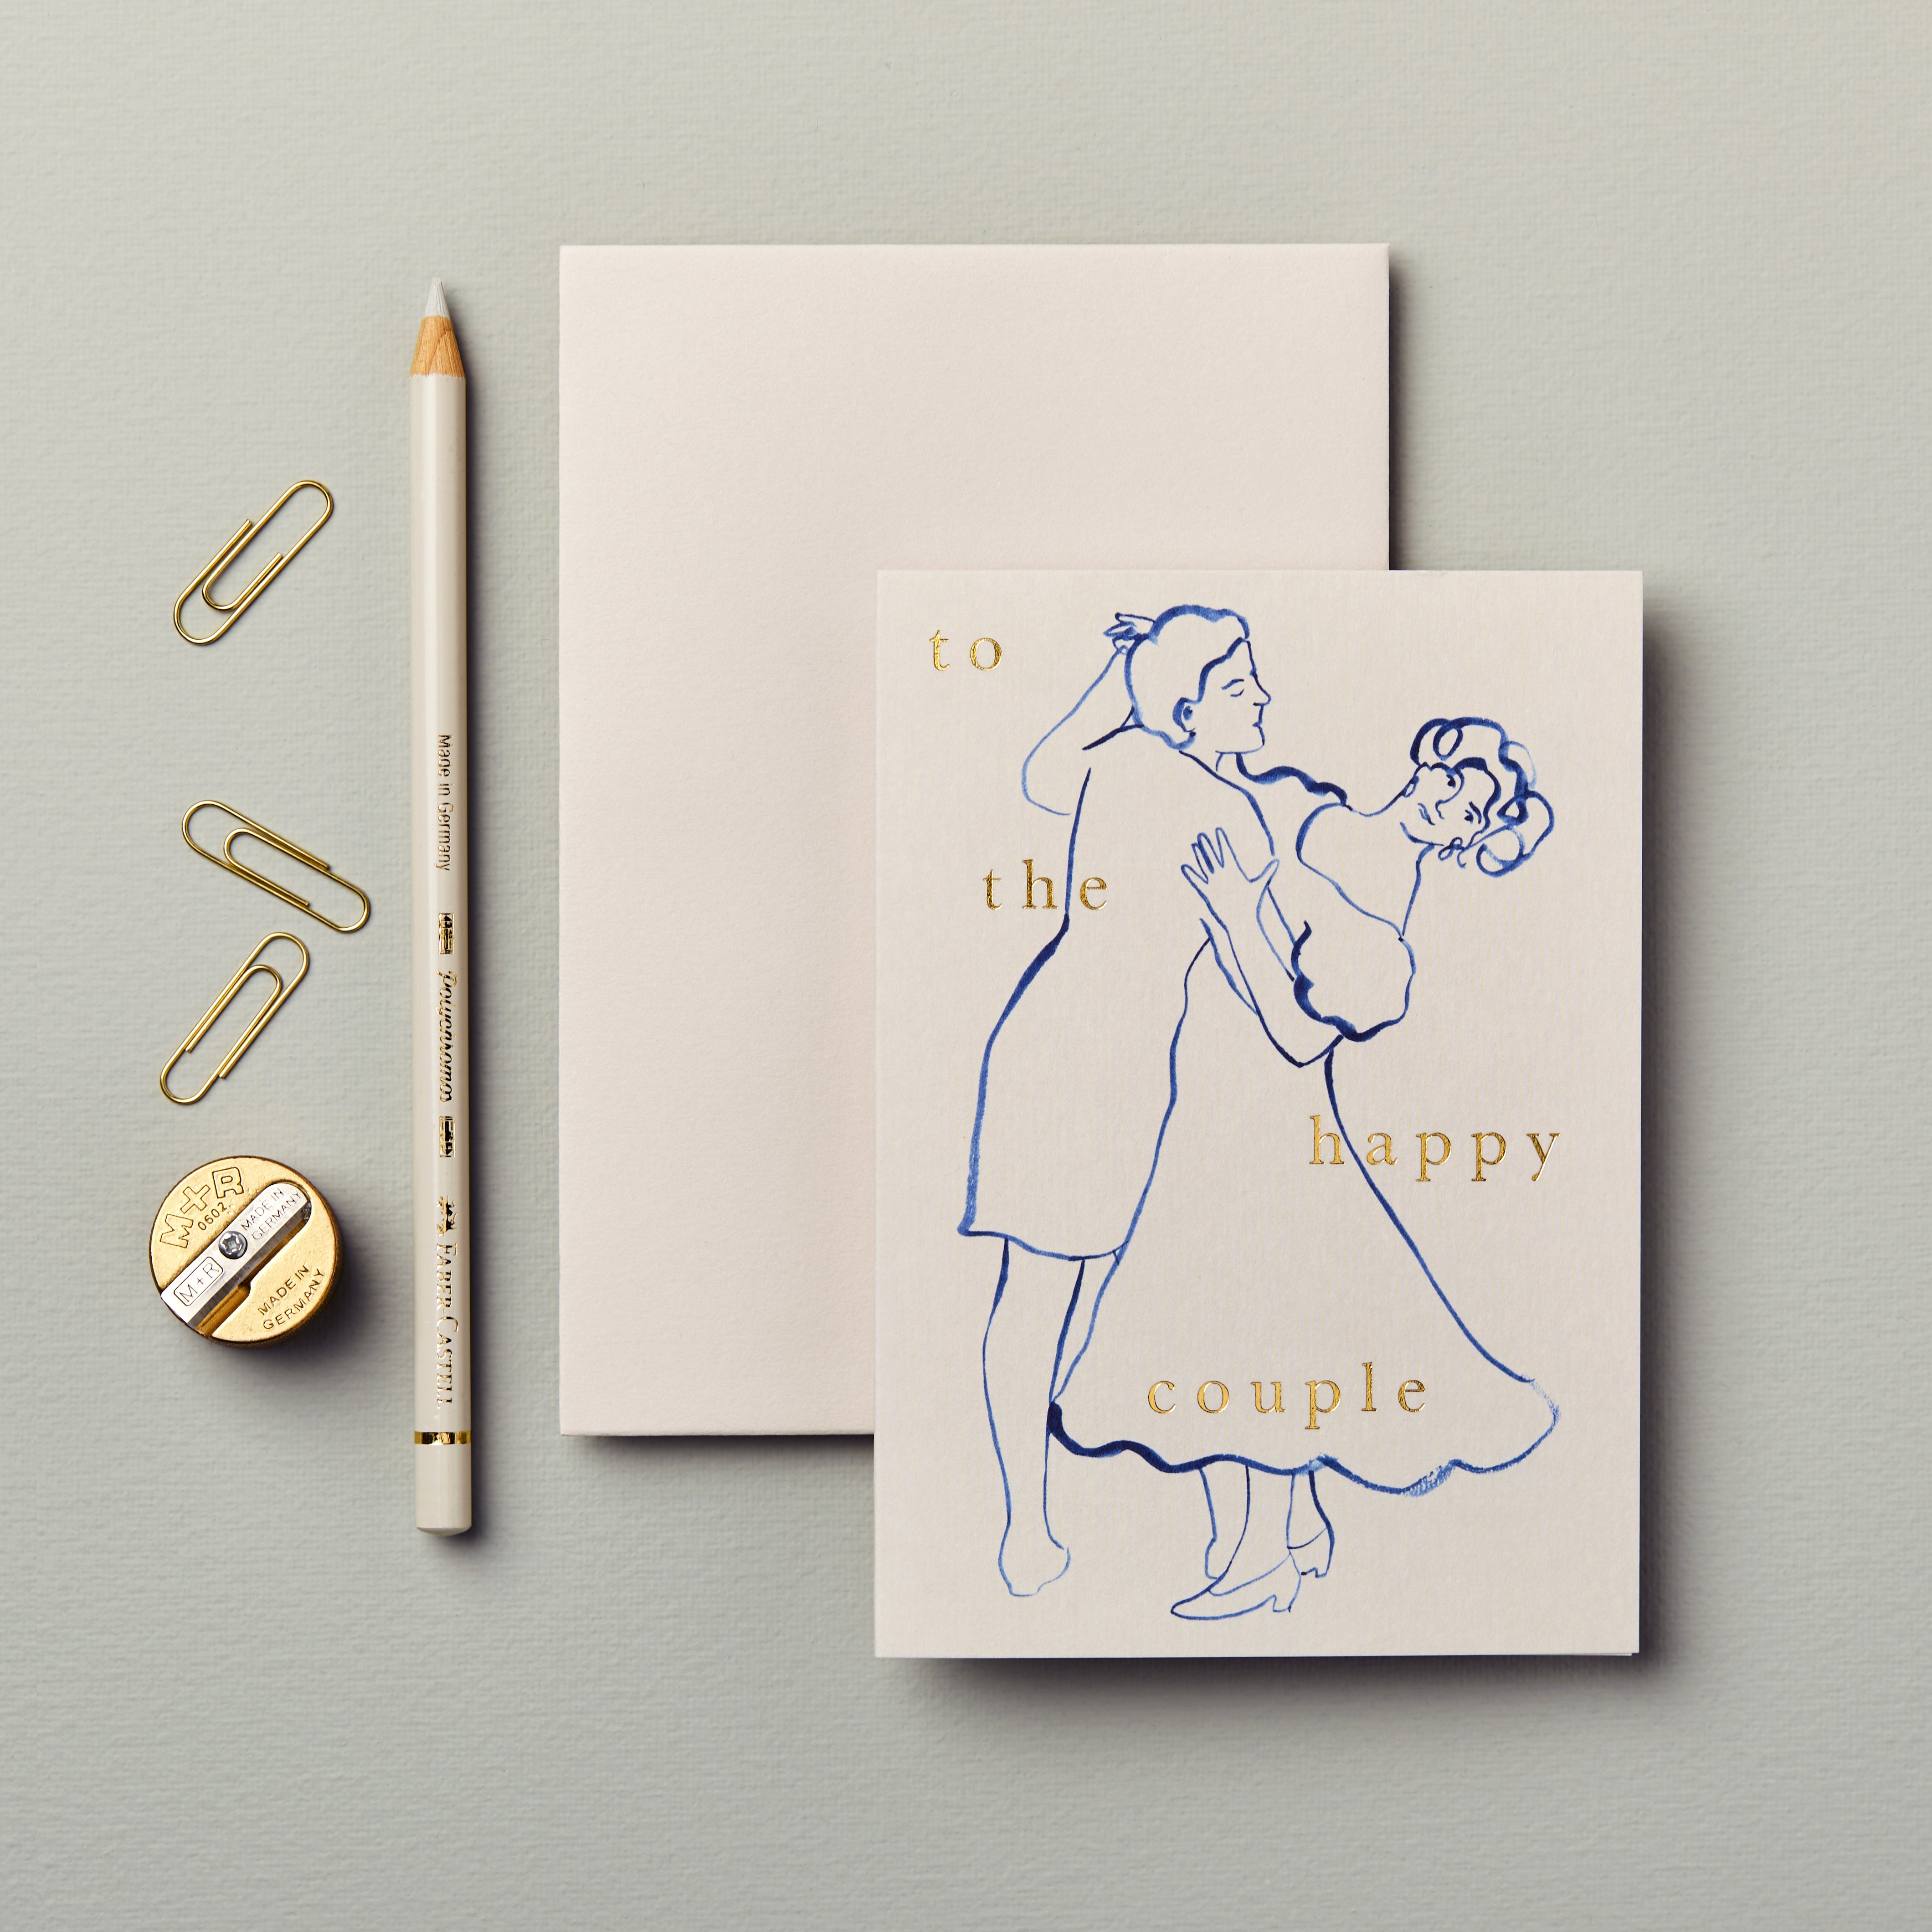 'To The Happy Couple' Greetings Card